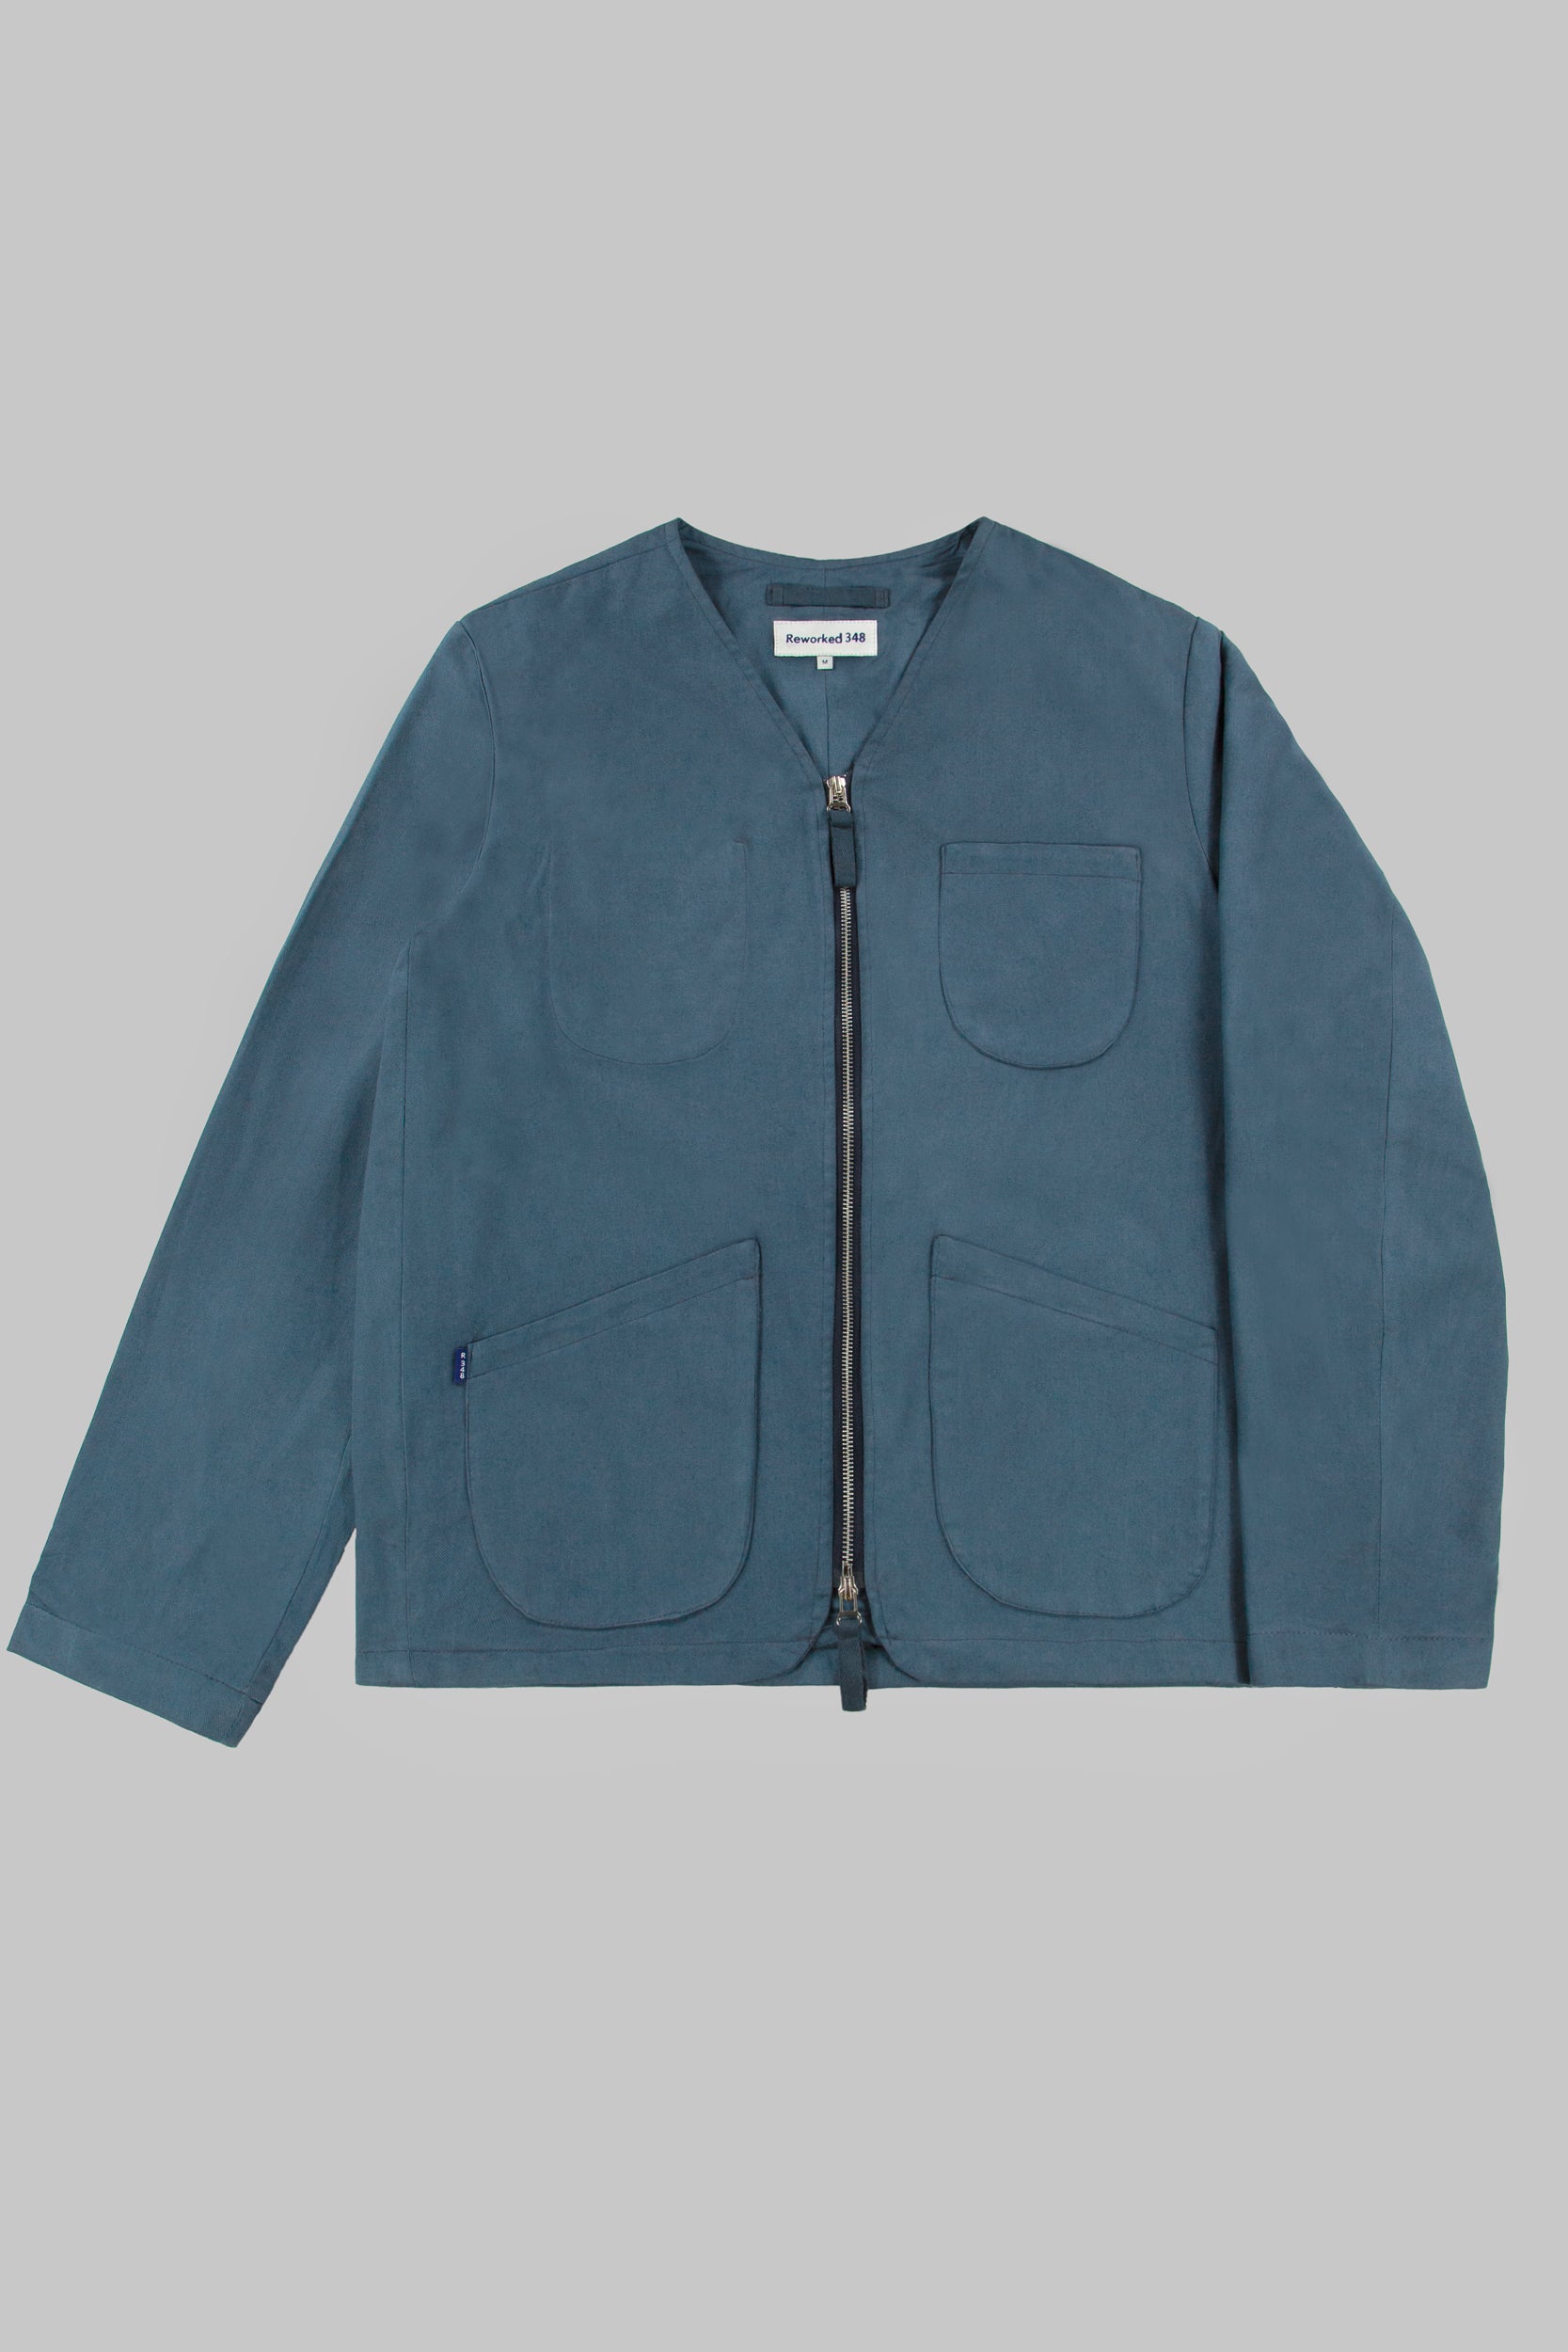 J Smith & Co. Coverall Liner Vintage Blue